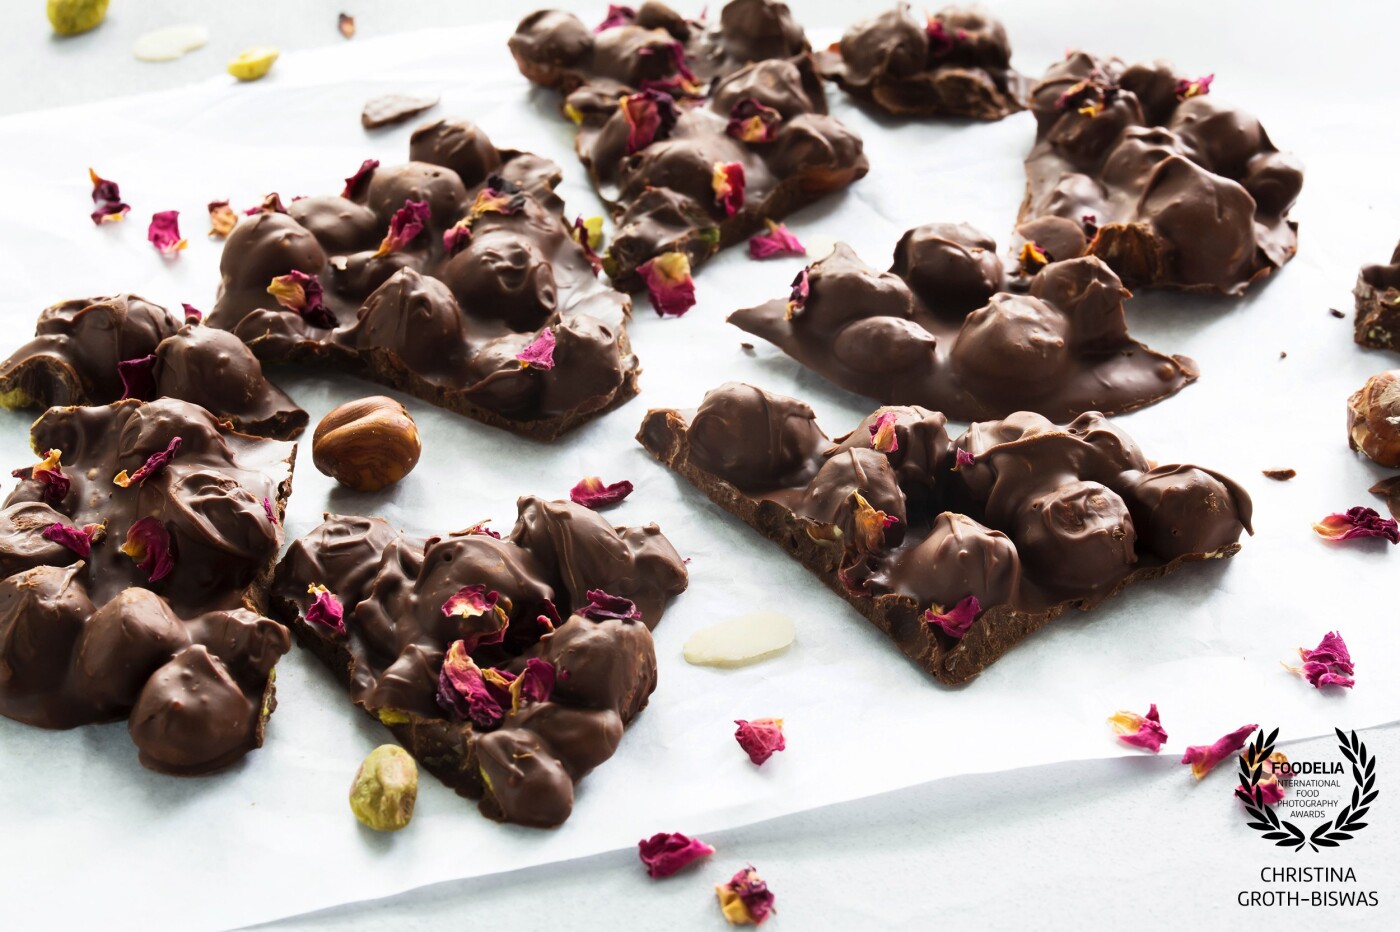 Dark chocolate and nuts, sprinkled with rose petals. I decided to use a white background for this picture, not my usual black. <br />
I also did not use any artificial lighting, just window light and a reflector.